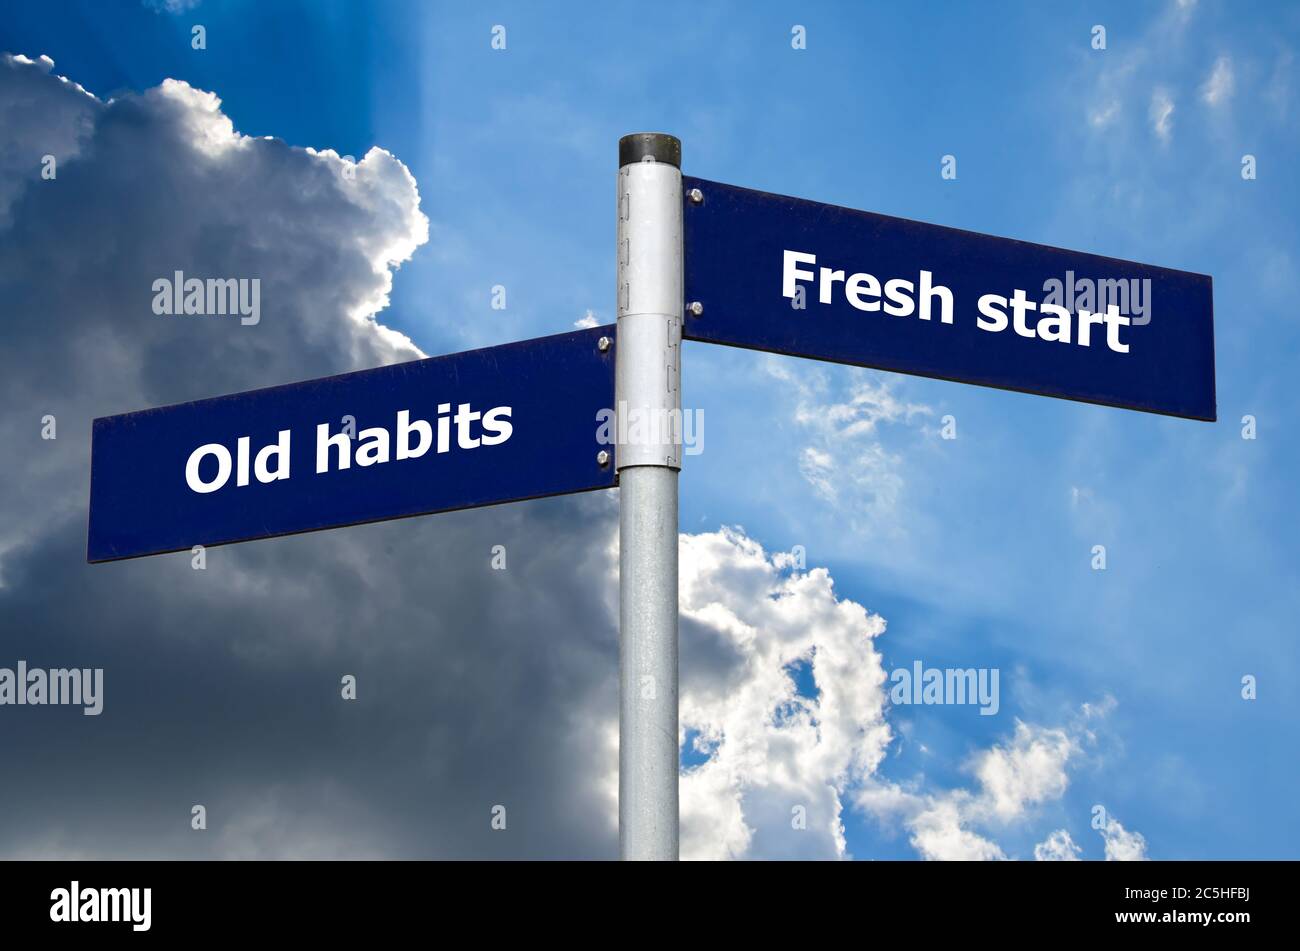 Street sign in front of dark clouds symbolizing choice between 'old habits' and a 'fresh start' Stock Photo